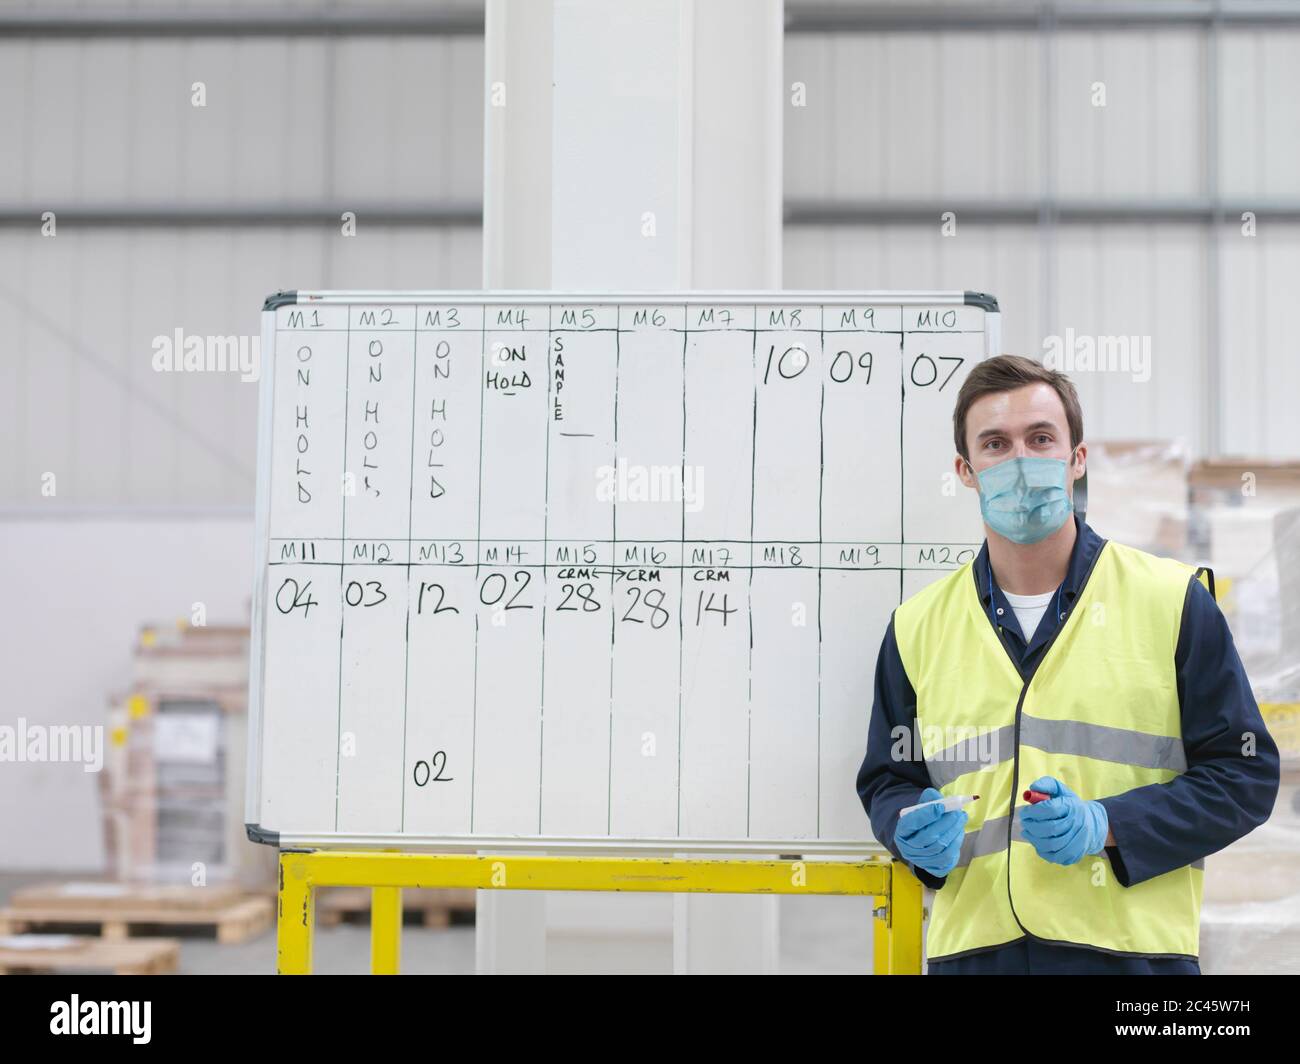 Man wearing surgical face mask and high visibility vest working in a large warehouse. Stock Photo